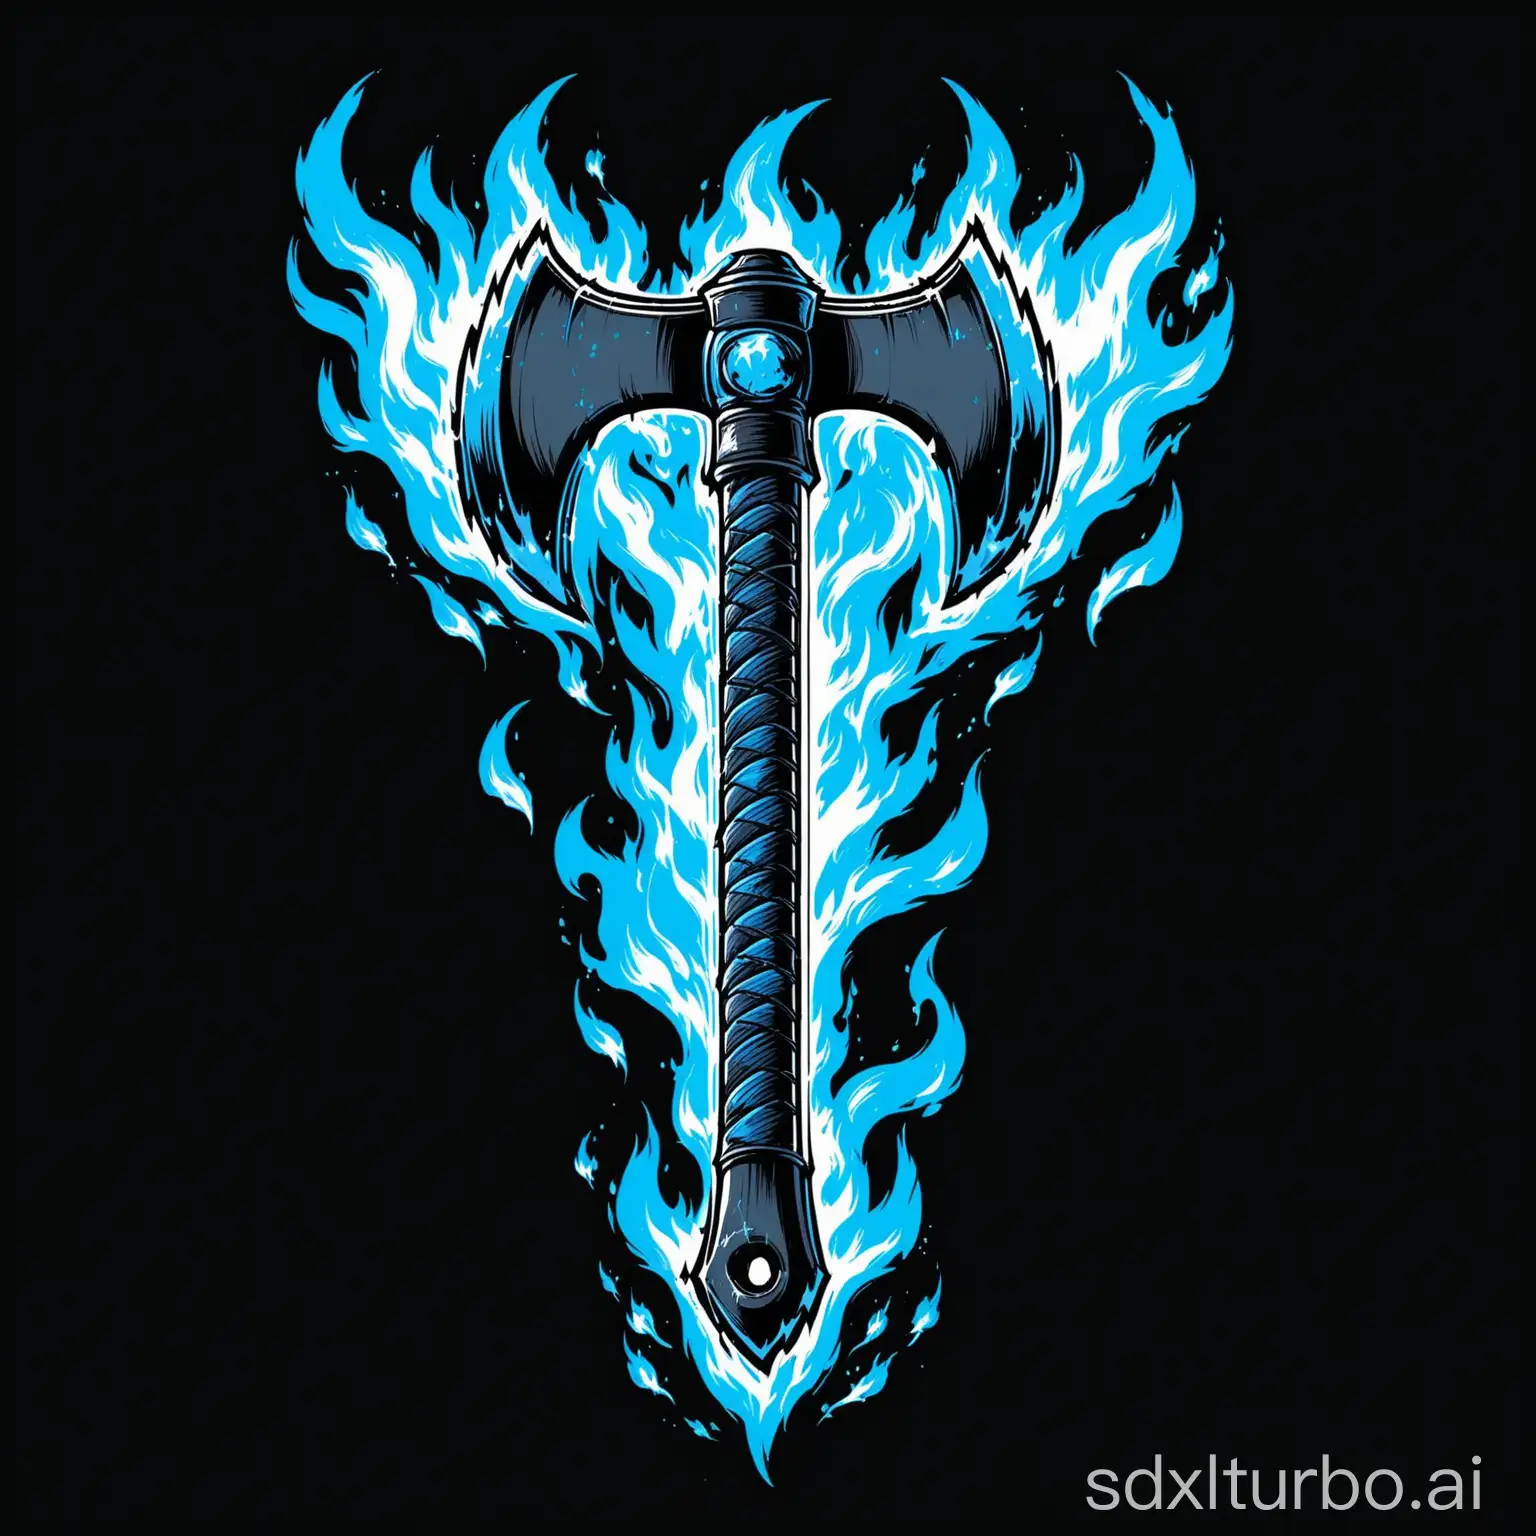 A blue-flaming double-sided axe on a uniform black background